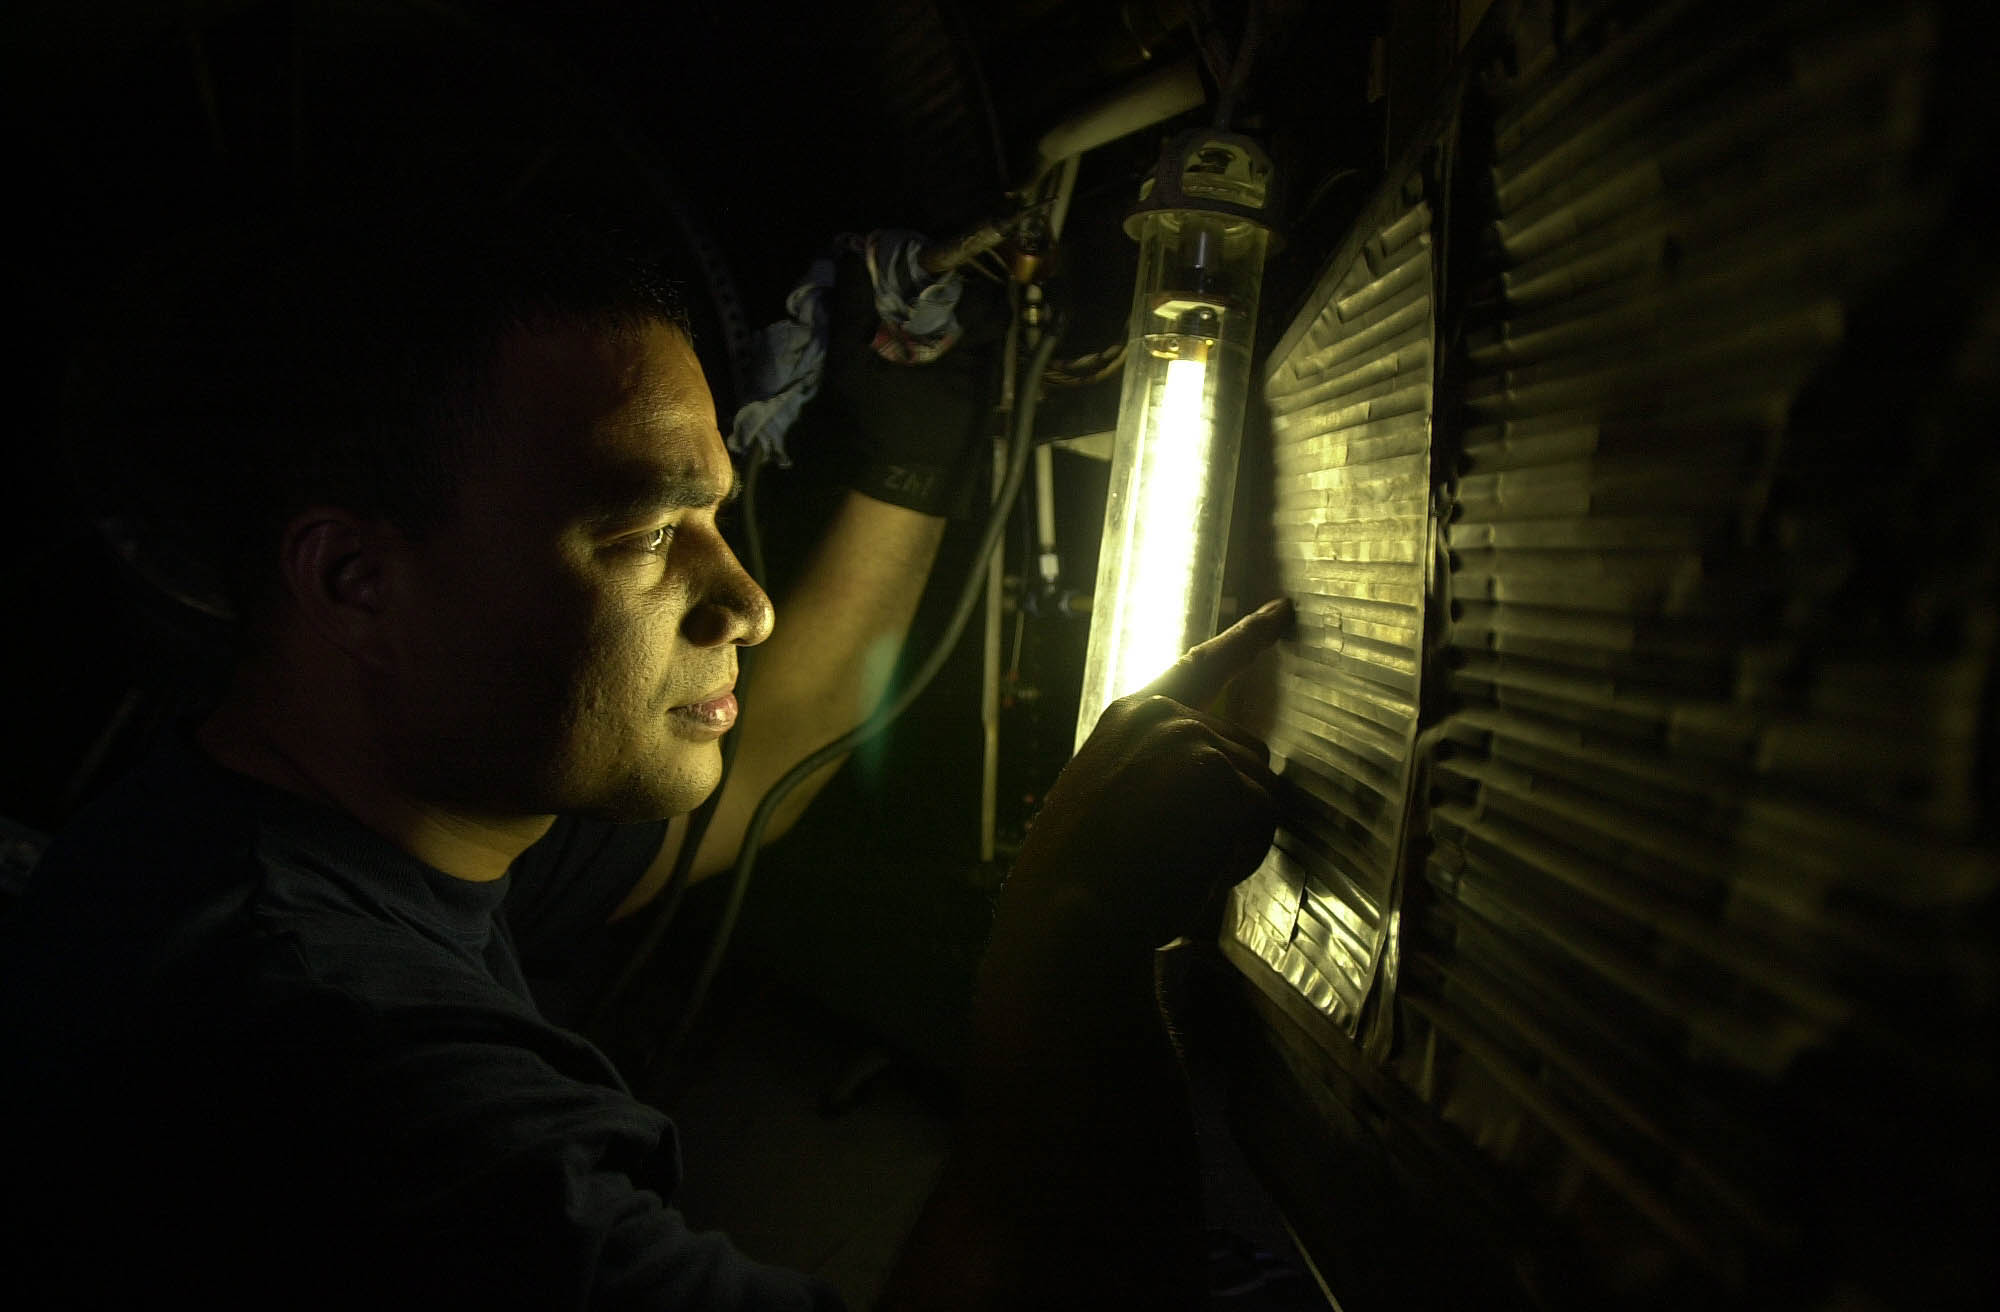 US Navy 030801-N-0413R-002 Aviation Machinist^rsquo,s Mate 3rd Class Ricky Clarence, inspects the heat shield of an aircraft aboard USS Nimitz (CVN 68)